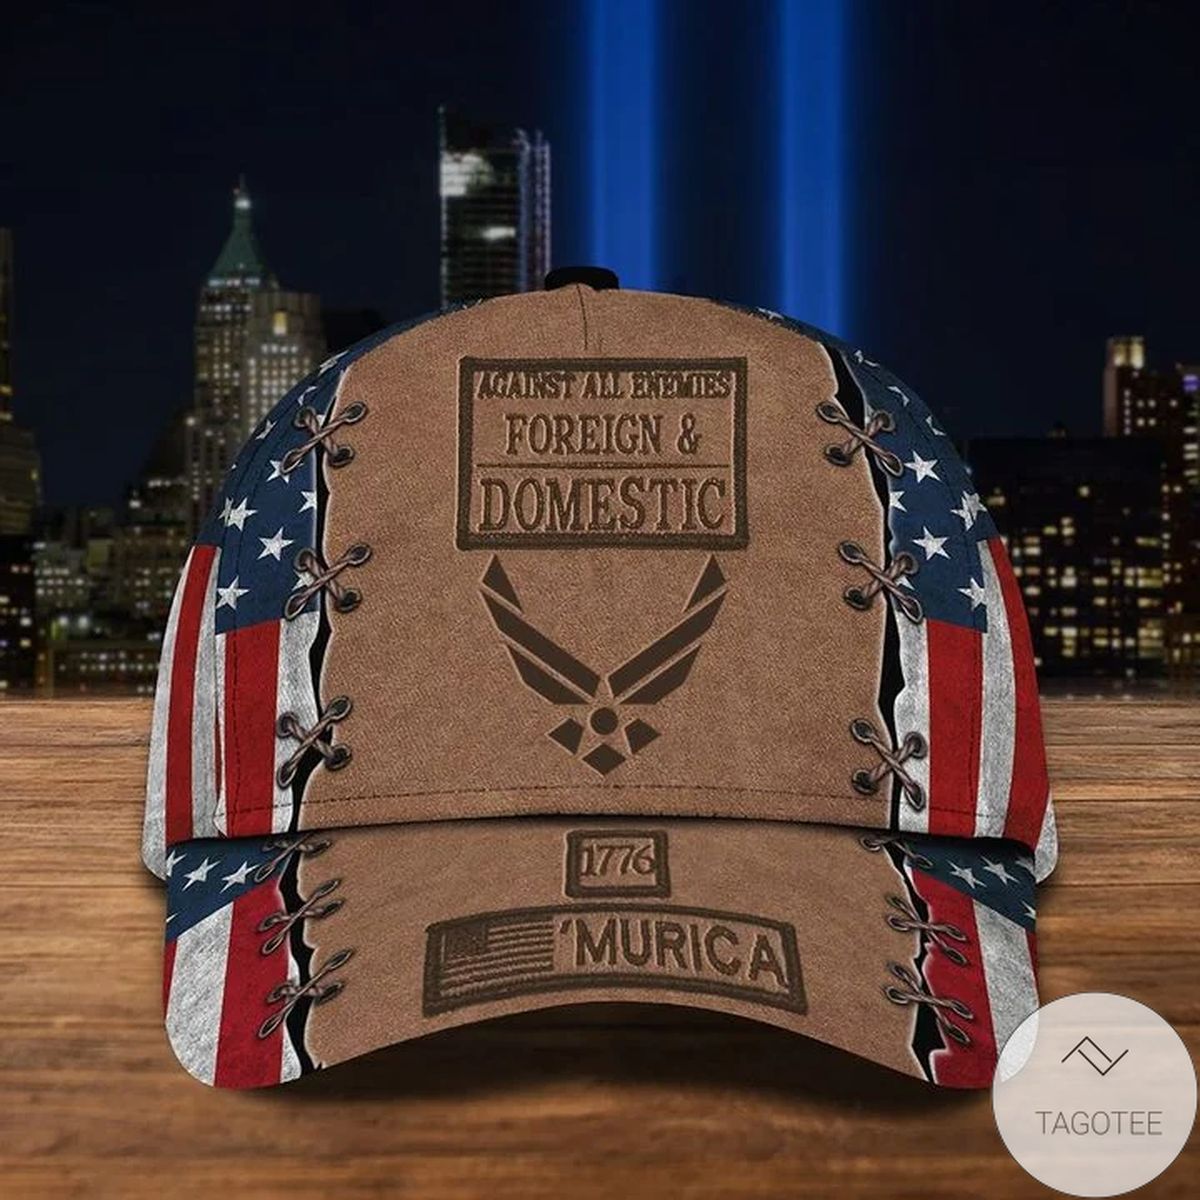 Air Force 1776 'Murica Hat Against All Enemies Foreign & Domestic USAF American Flag Ball Cap